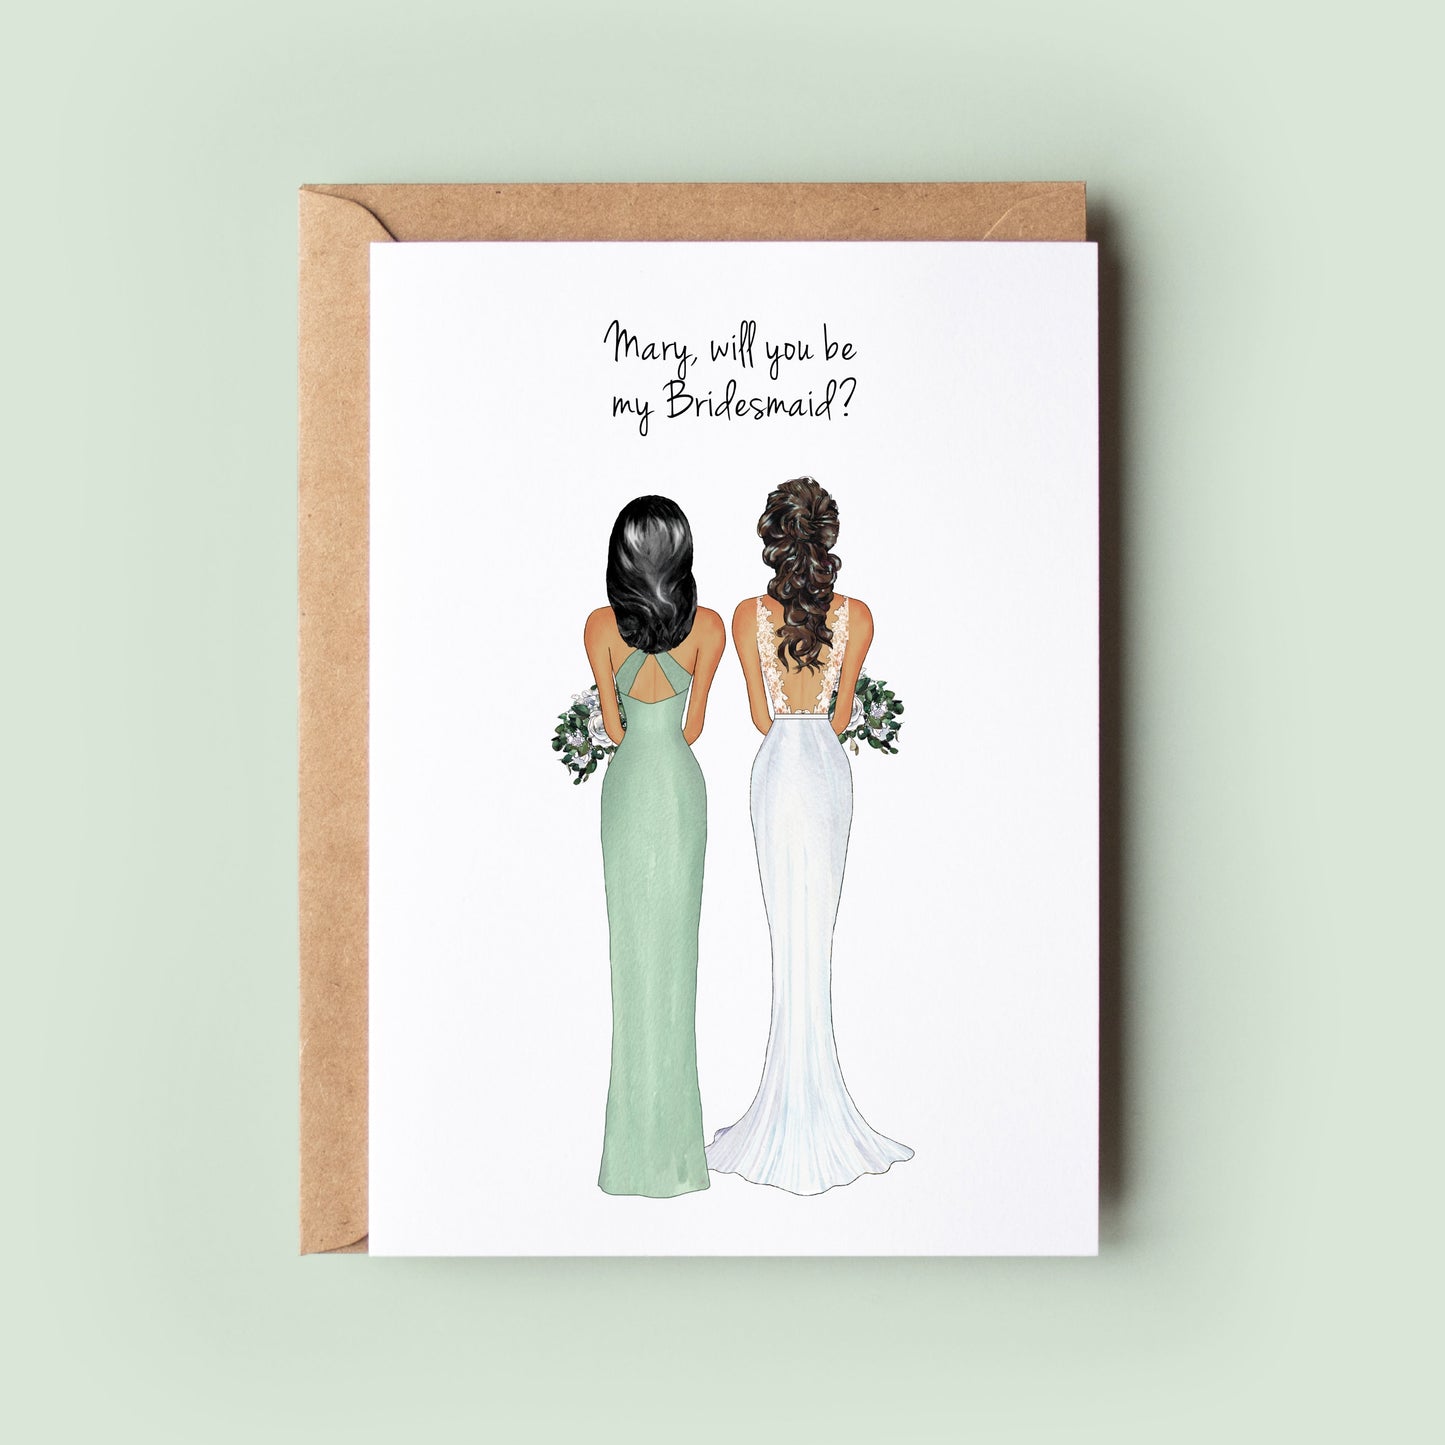 A personalized Will You Be My Bridesmaid card, with customizable bridesmaid dress style and color, brides dress and veil, body shape, skin tone, and hair. Make your bridesmaid proposal an unforgettable moment.